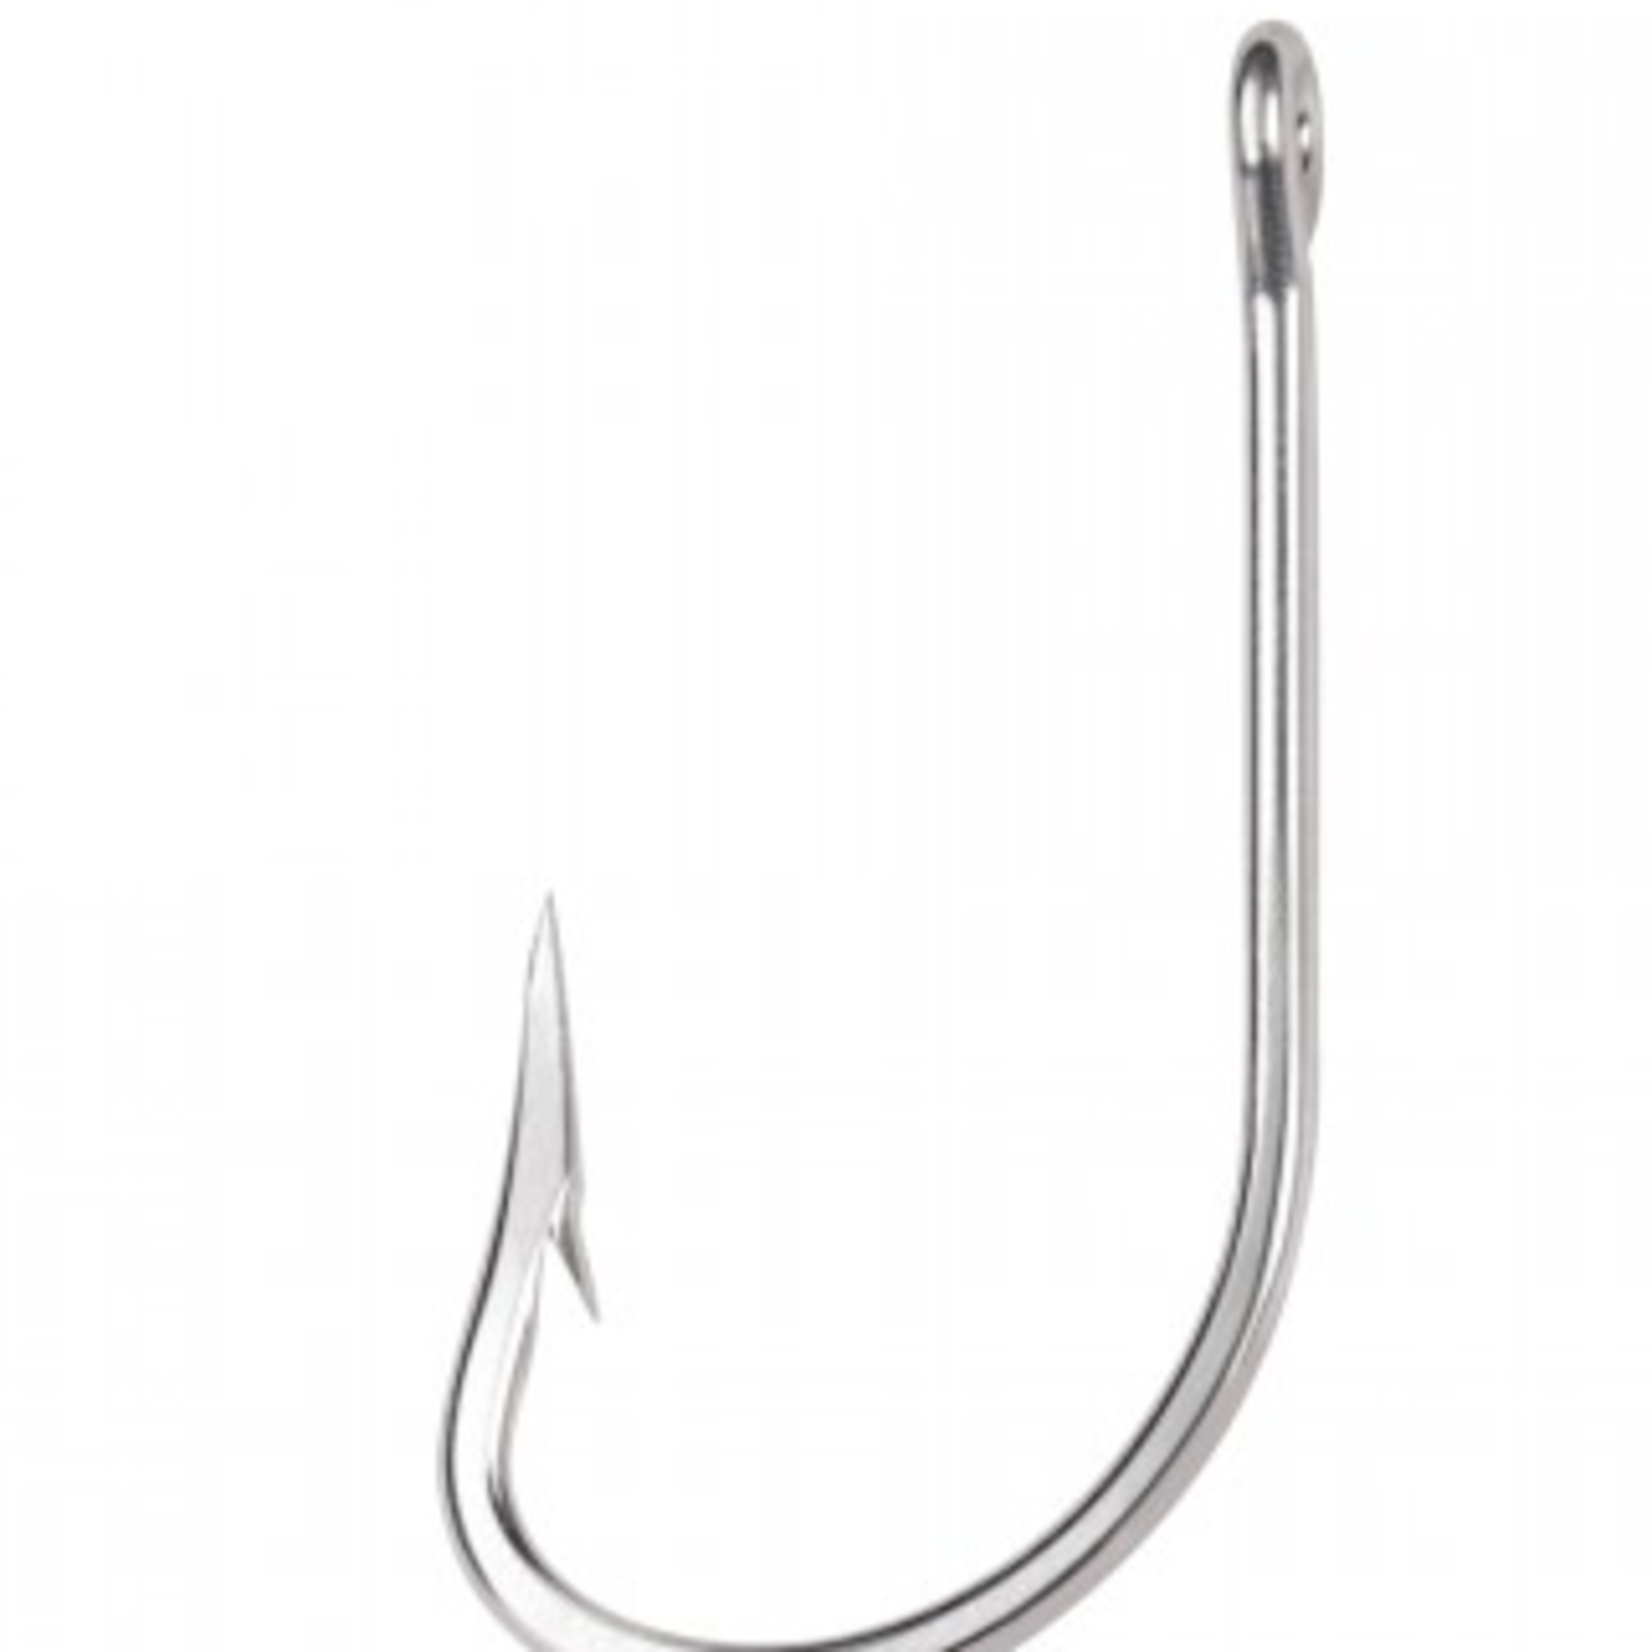 10X 6/0 7691s Quality Stainless Steel Big Game Fishing Hooks for Trolling  Lures.